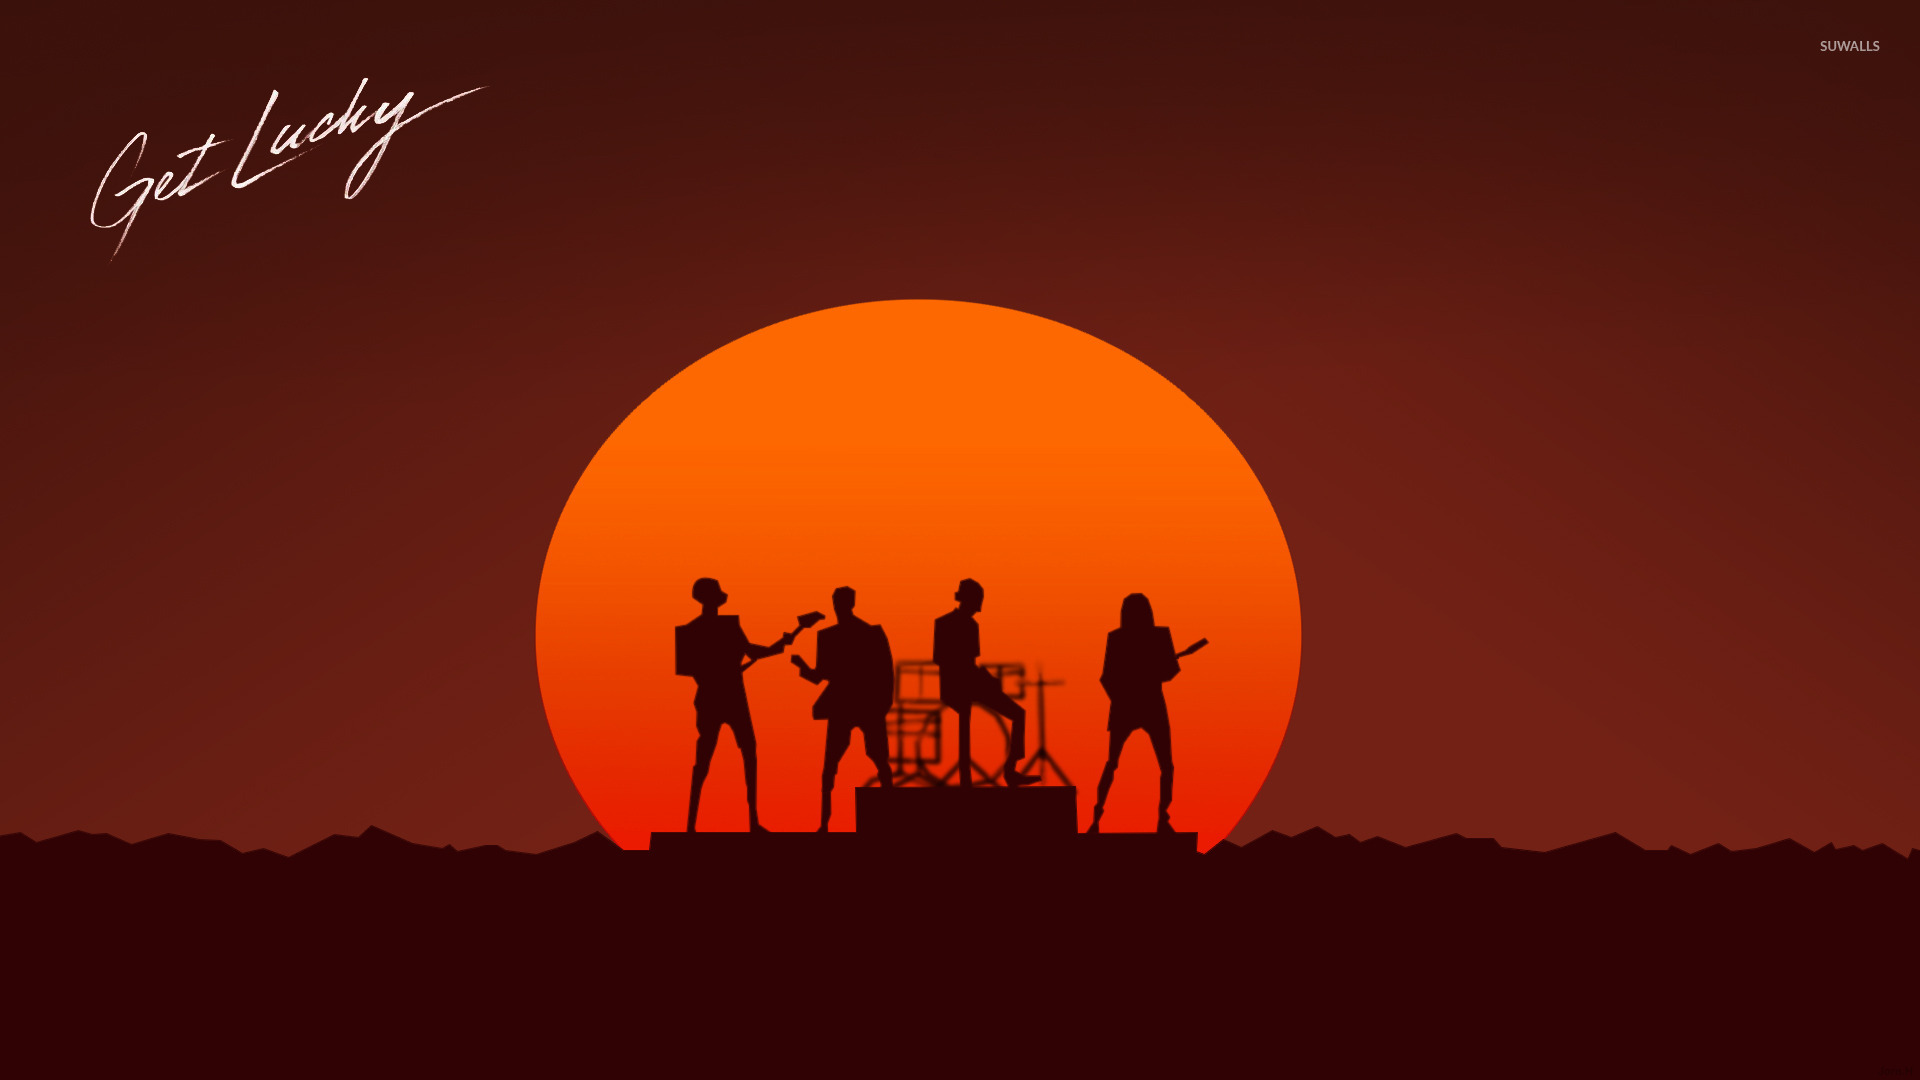 Free download Daft Punk Get Lucky wallpaper Music wallpapers 27977  [1366x768] for your Desktop, Mobile & Tablet | Explore 48+ Daft Punk  Wallpaper 1366x768 | Daft Punk Hd Wallpaper, Daft Punk Background, Daft Punk  Wallpapers